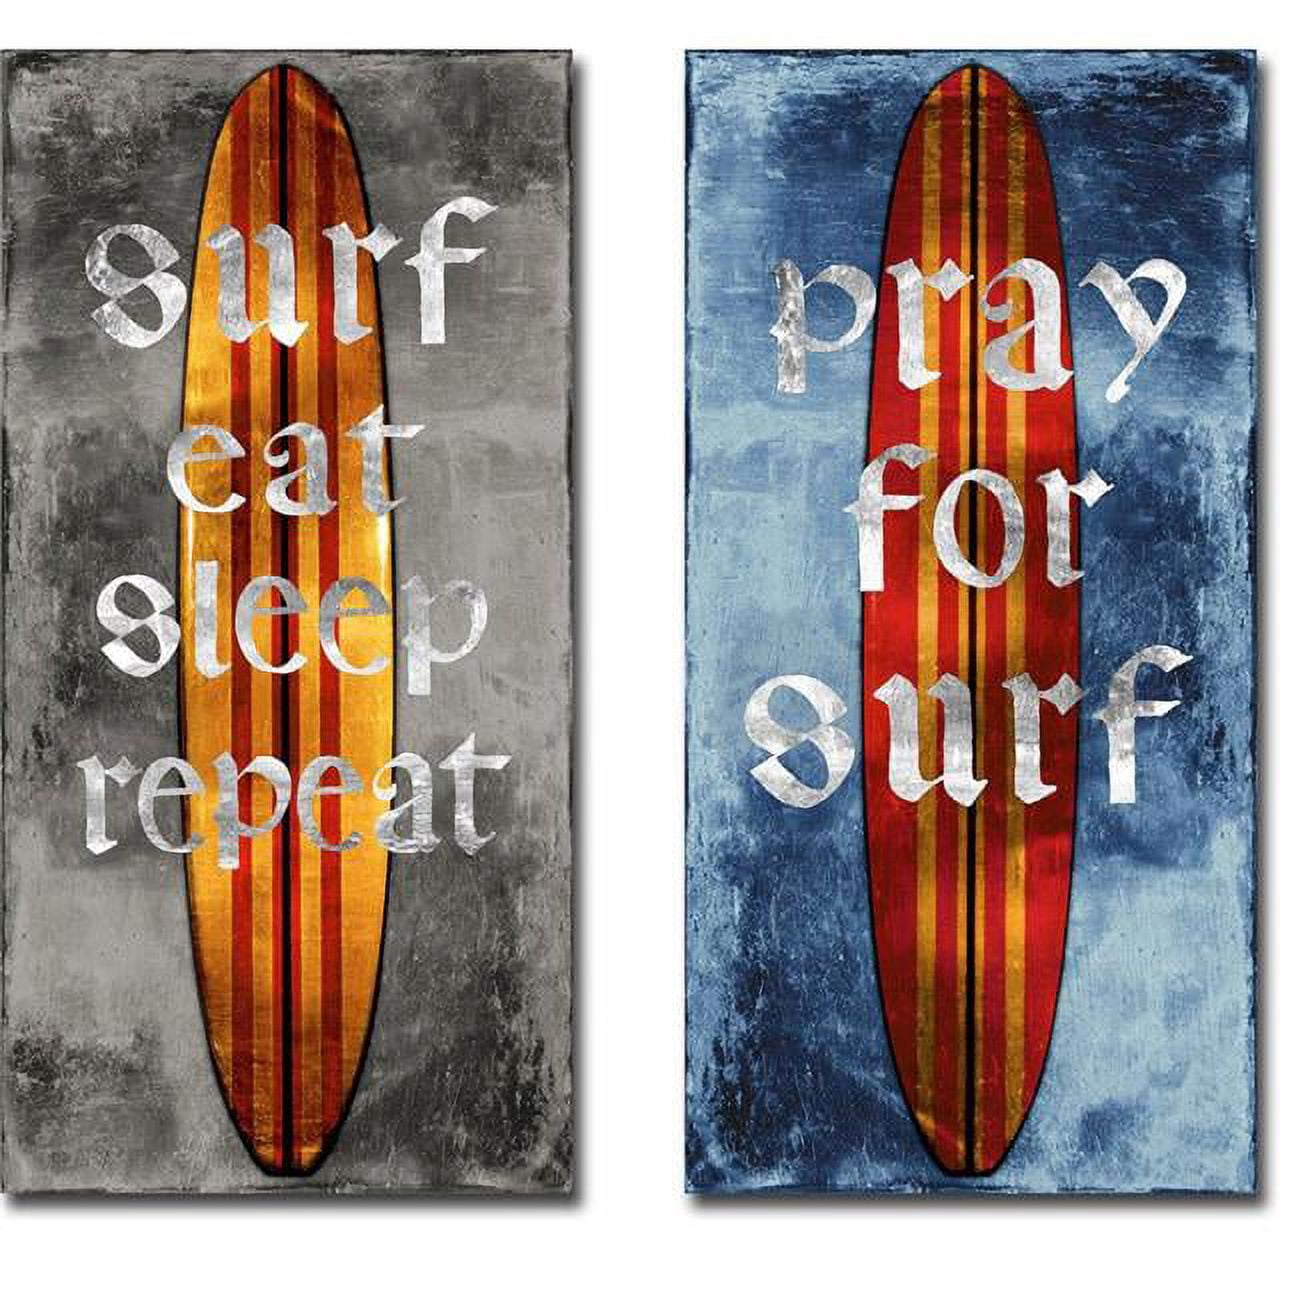 1632677tg Surf Repeat & Pray For Surf, Surfboard By Charlie Carter 2-piece Premium Gallery-wrapped Canvas Giclee Art Set - 32 X 16 In.